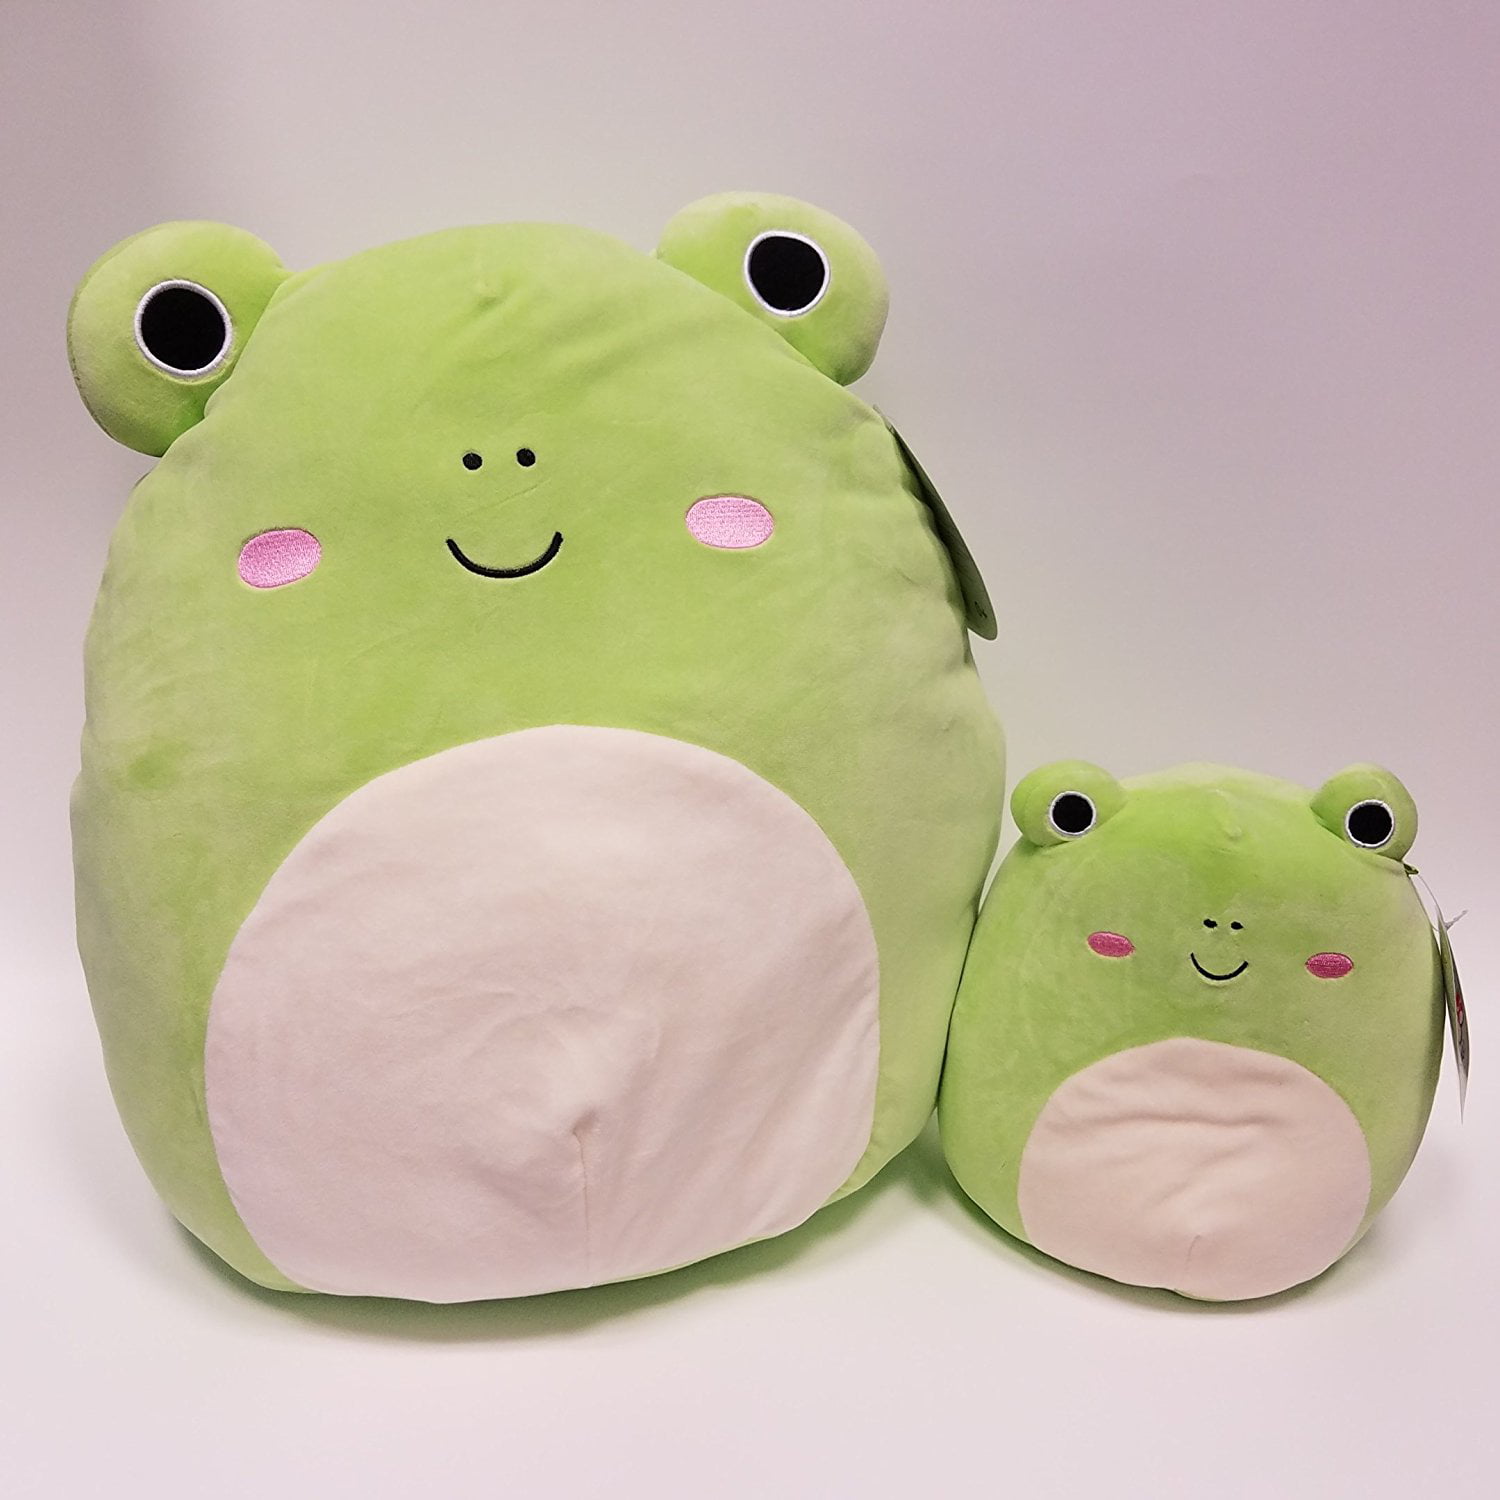 Squishmallow 16" Wendy The Frog Plush Toy Stuffed Animal Gift For Kids 40cm 